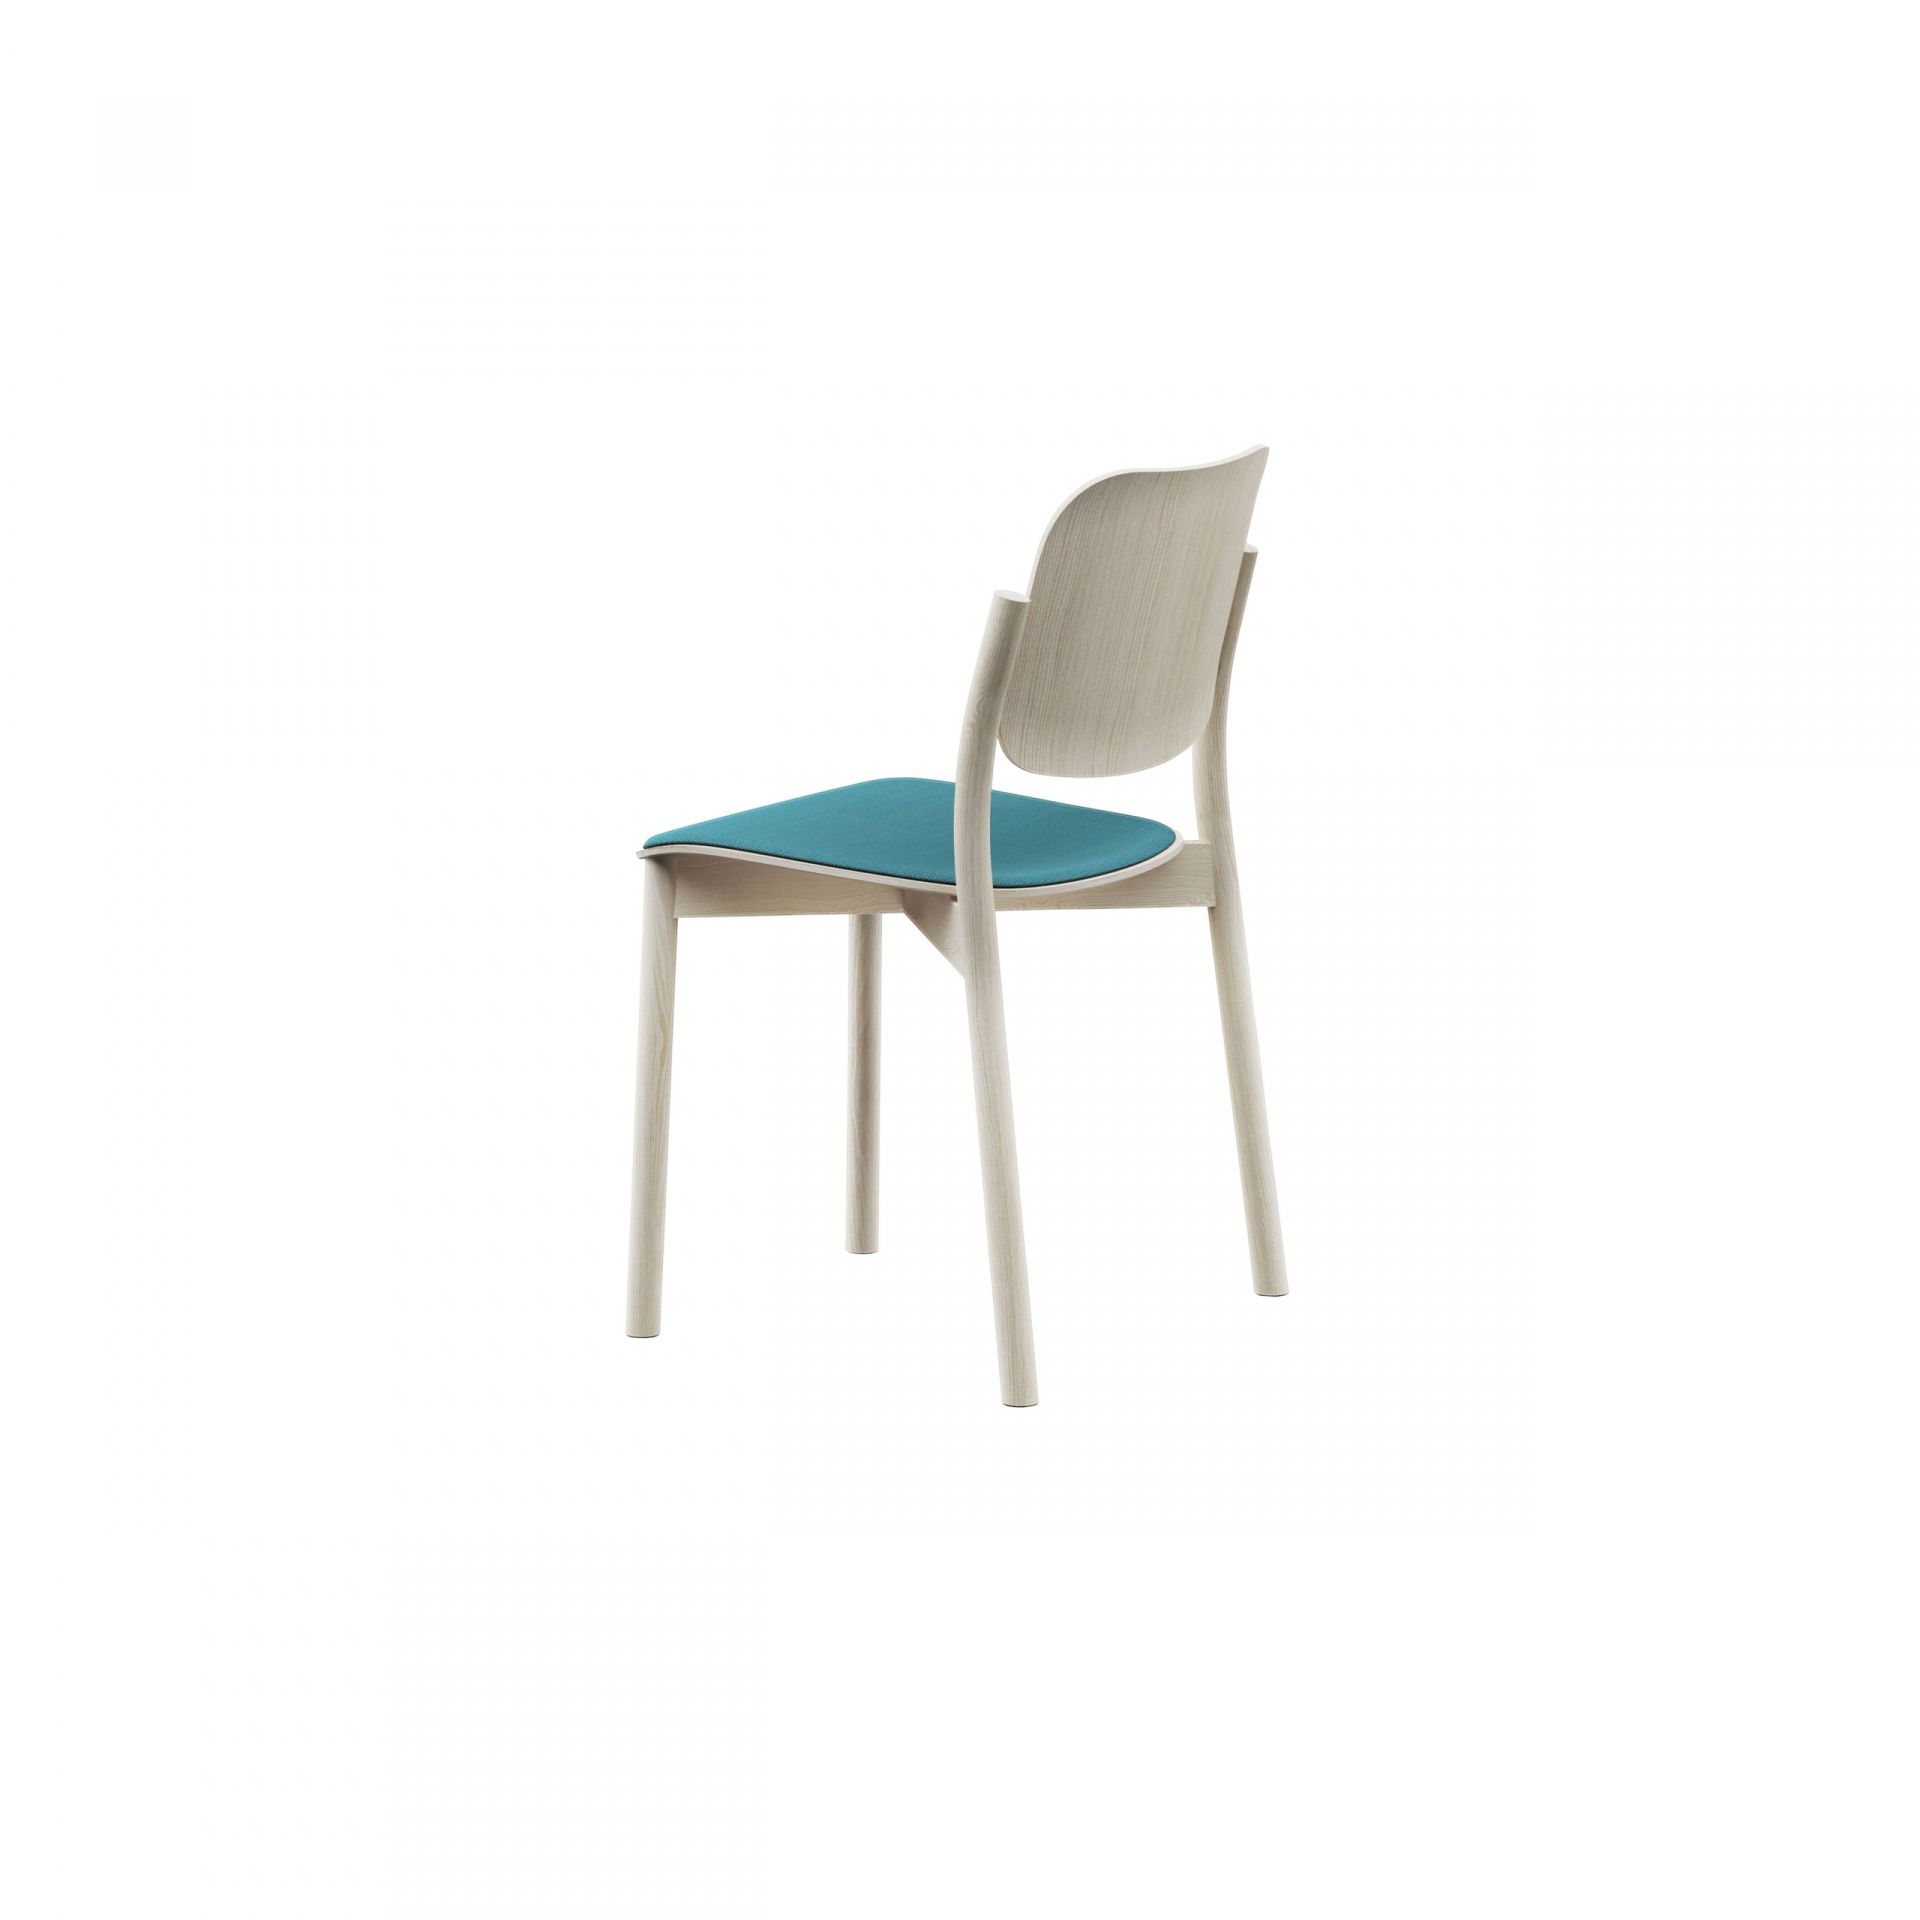 Zoe Wooden chair product image 6